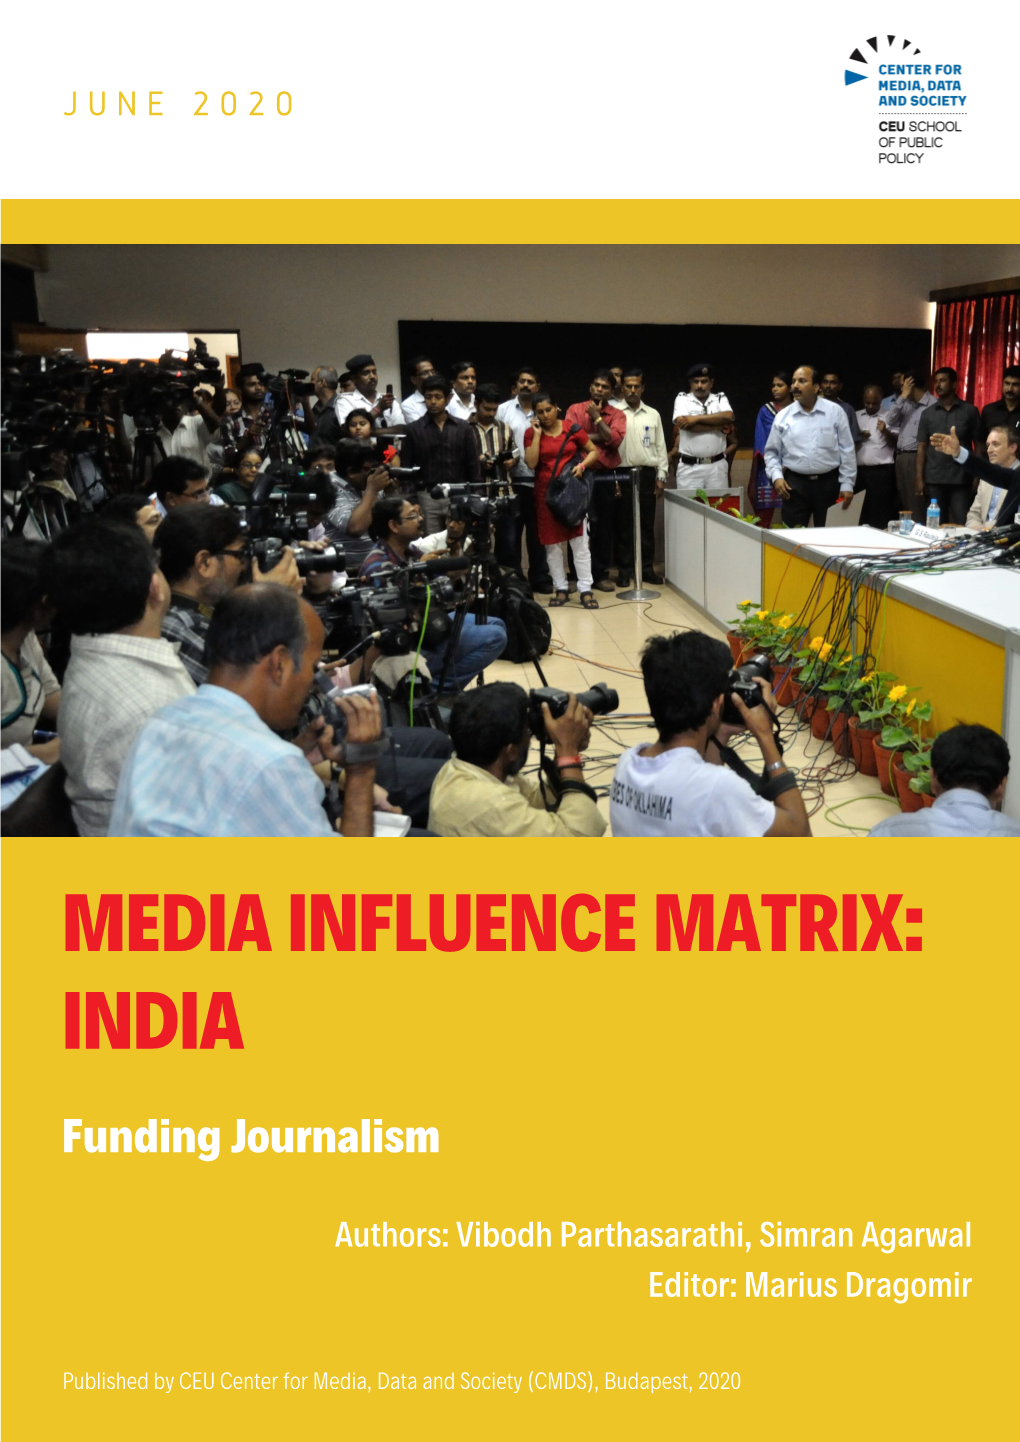 Download the Funding Chapter of the Media Influence Matrix India Report